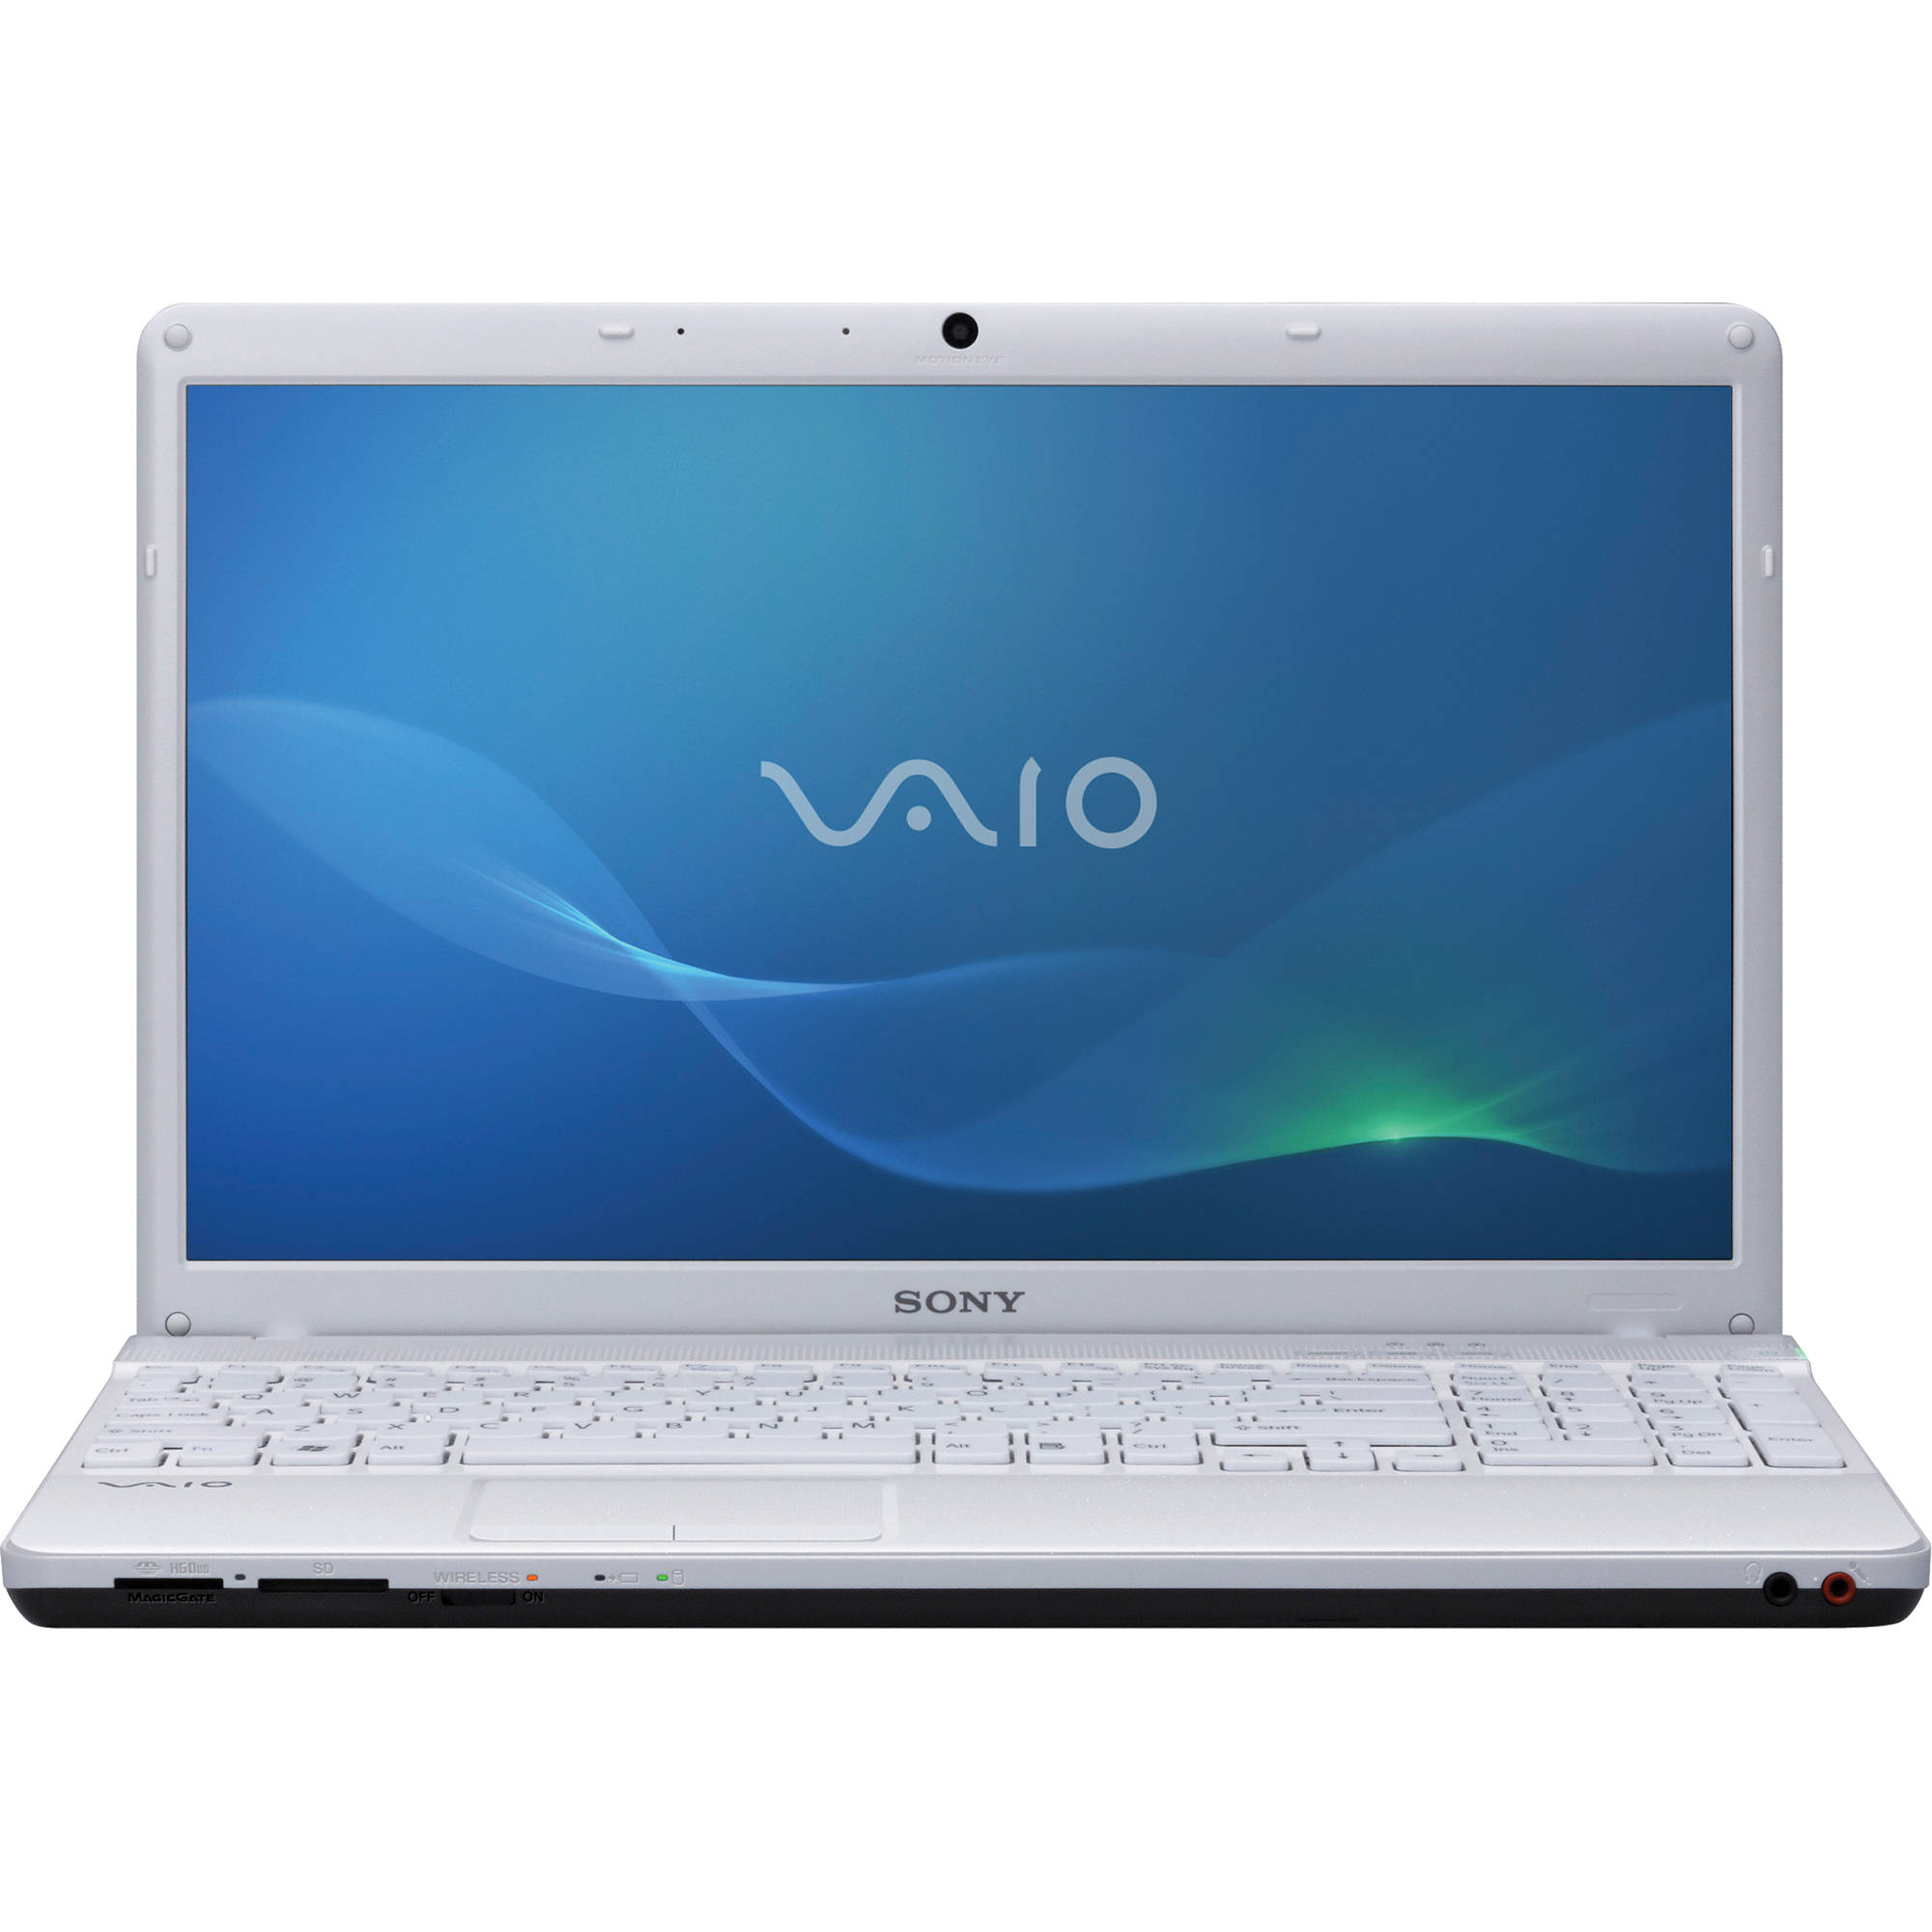 Sony Vaio Laptop Wifi Drivers For Windows 7 64 Bit Free Download